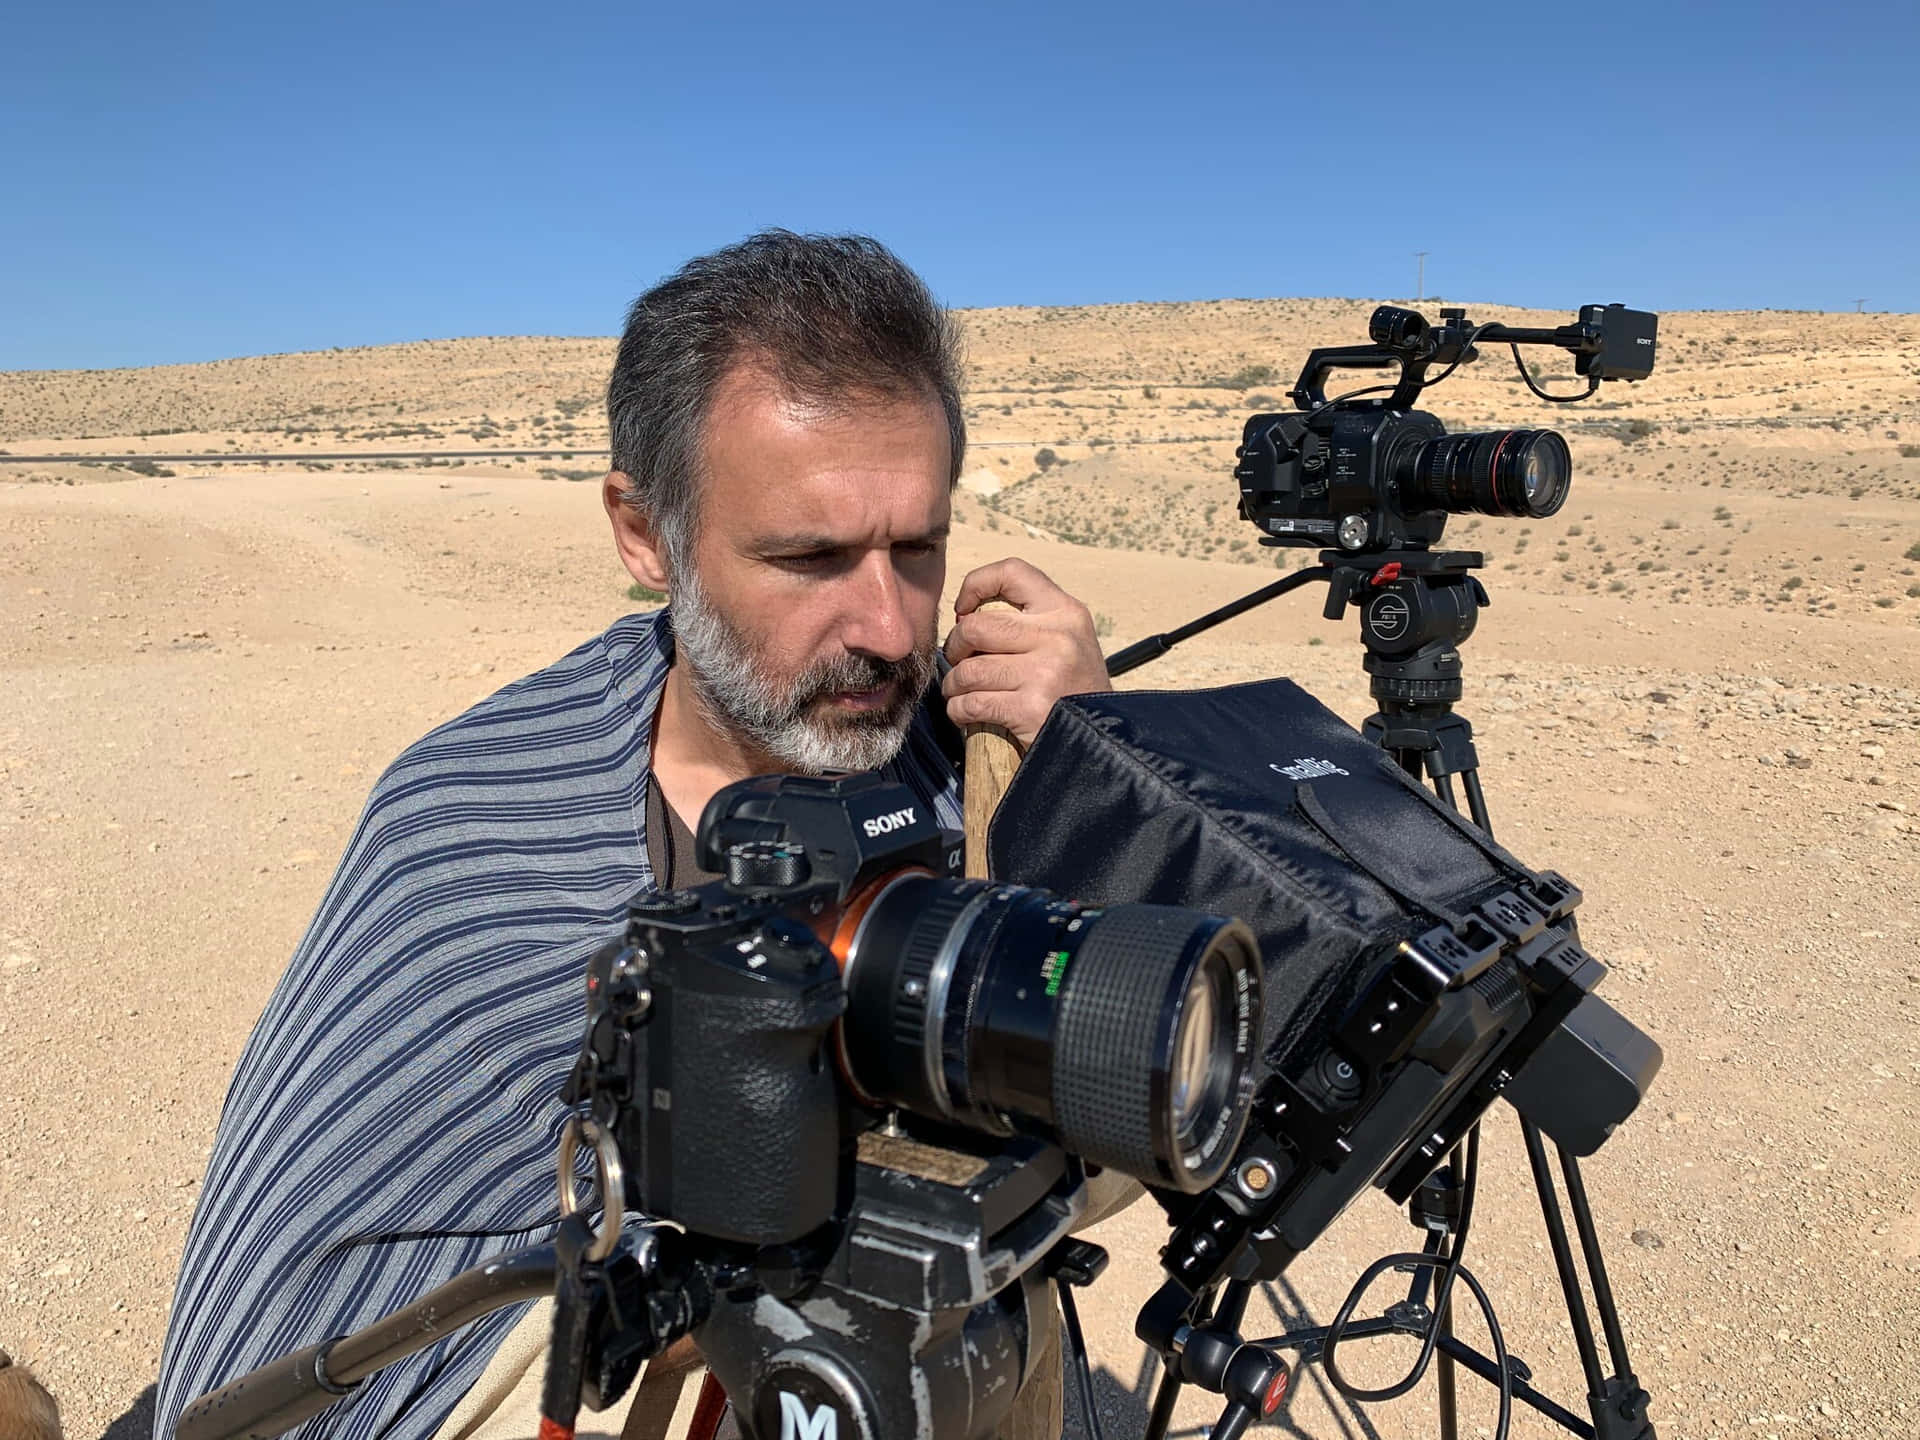 A Man In A Blanket Is Holding A Camera In The Desert